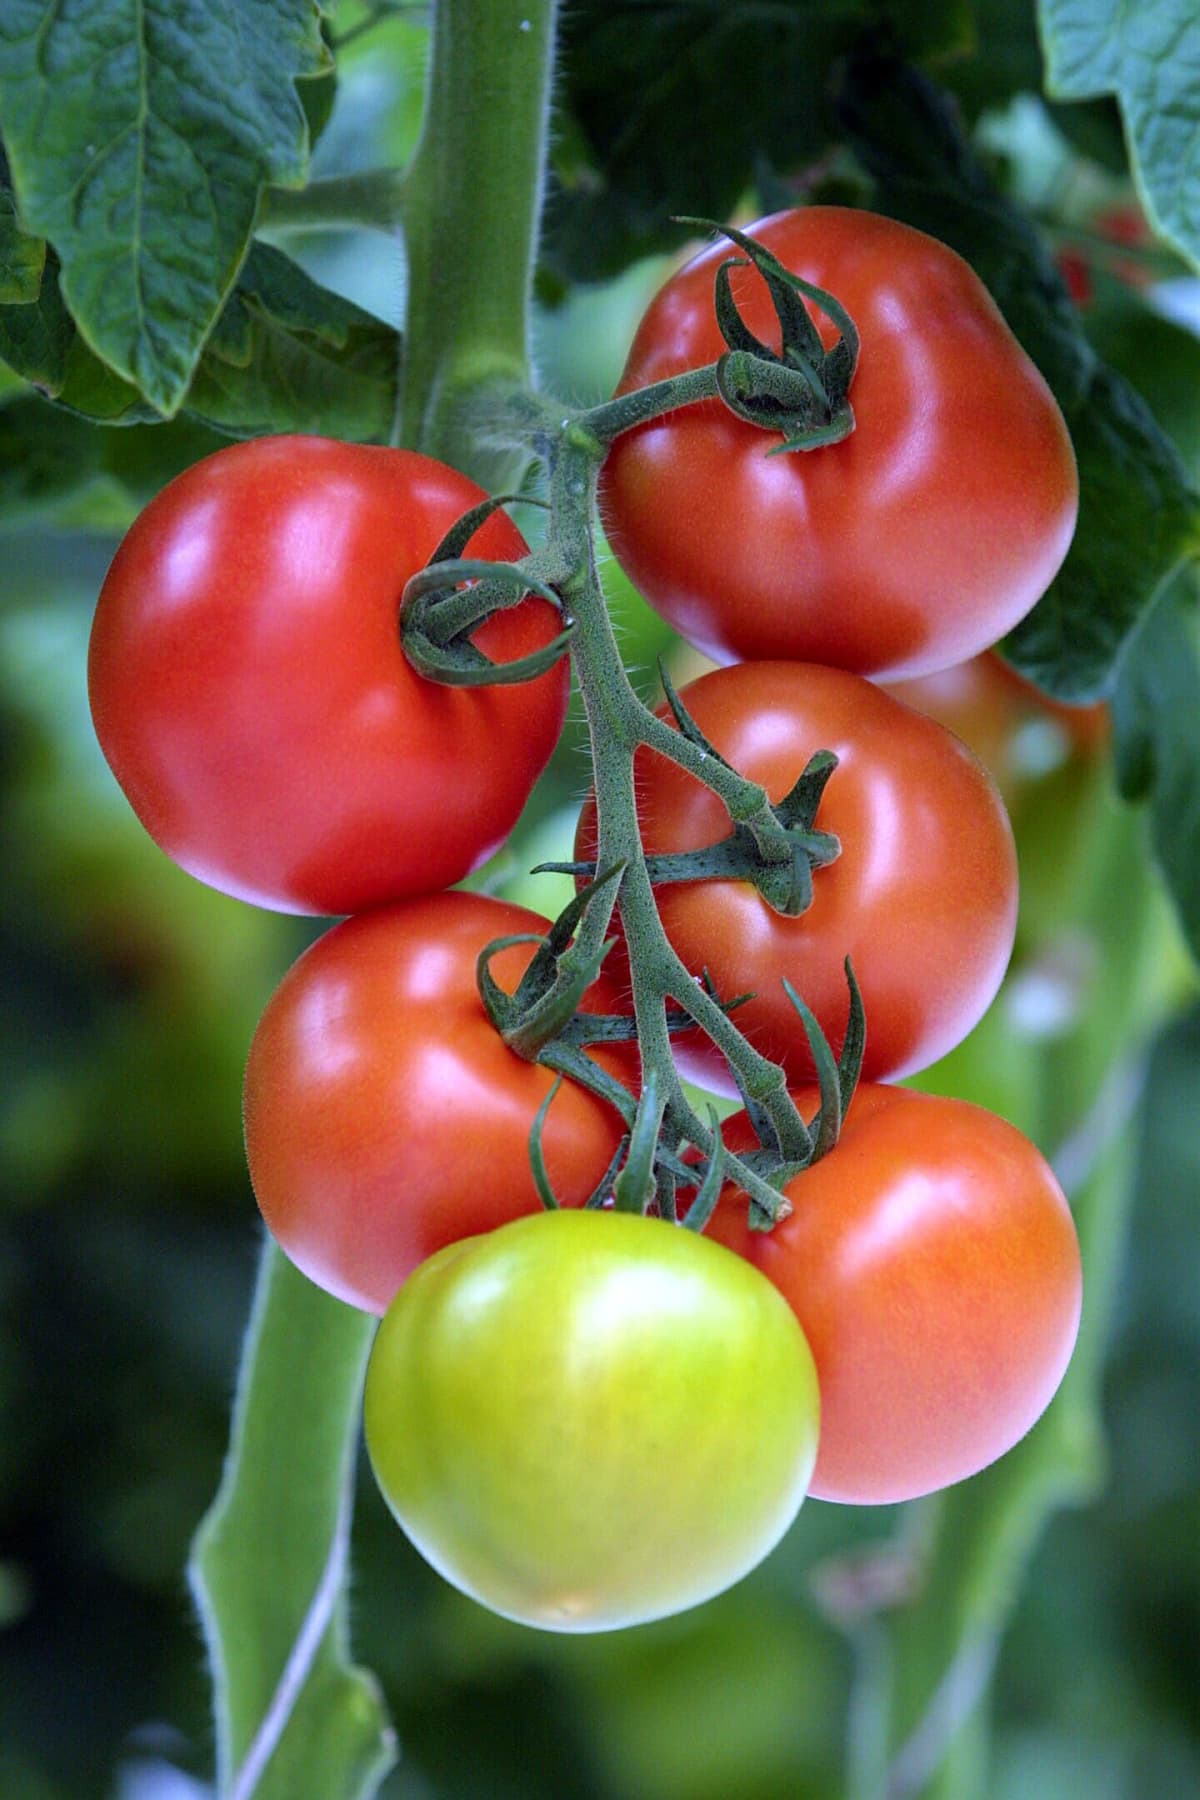 Tomatoes hanging from a lush green vine